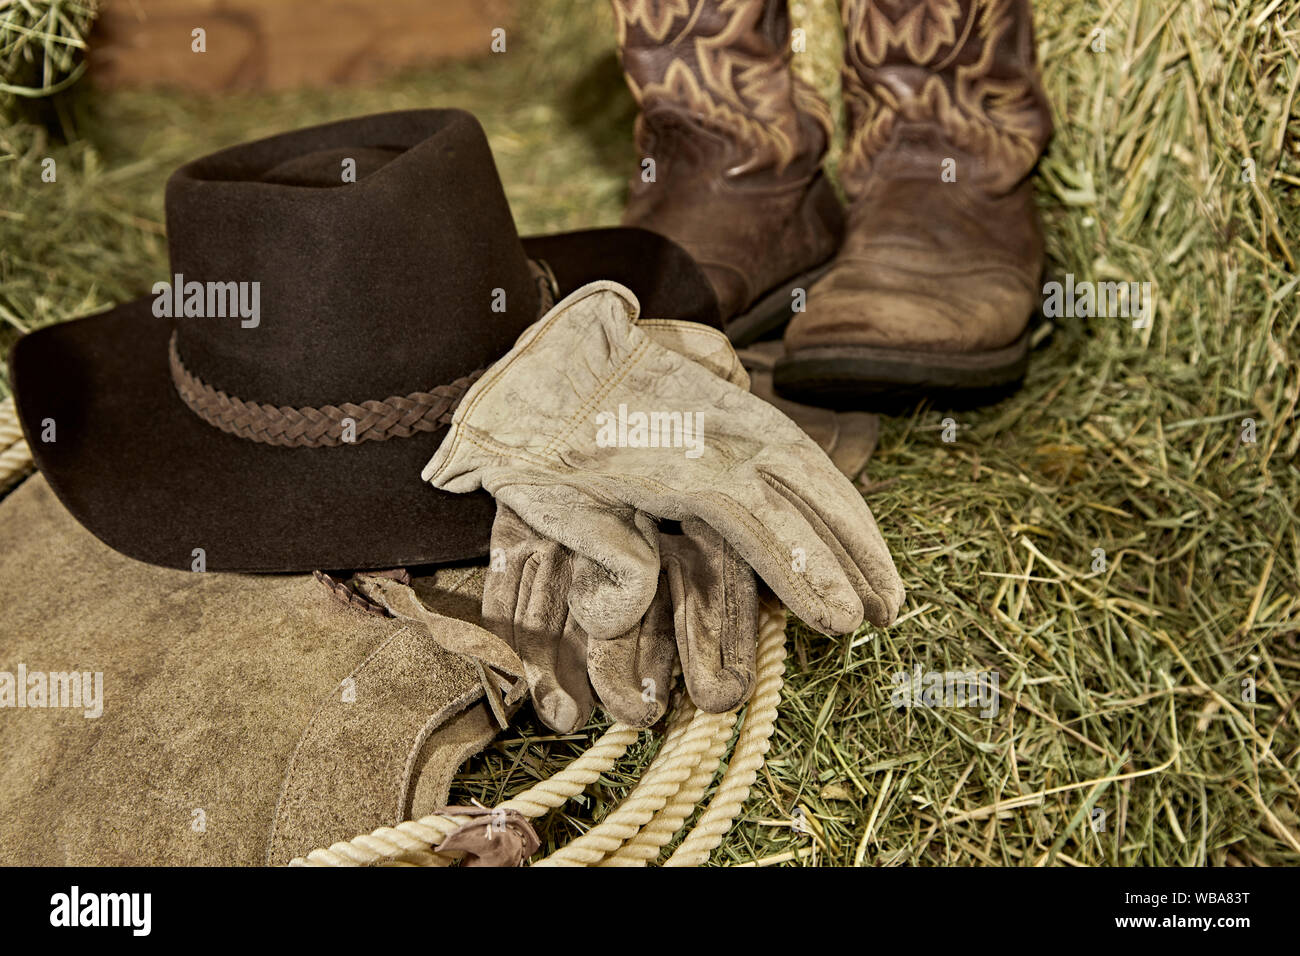 Western Cowboy hat with cowboy boots, leather gloves, leather chaps and a roper's rope on hay in a barn Stock Photo